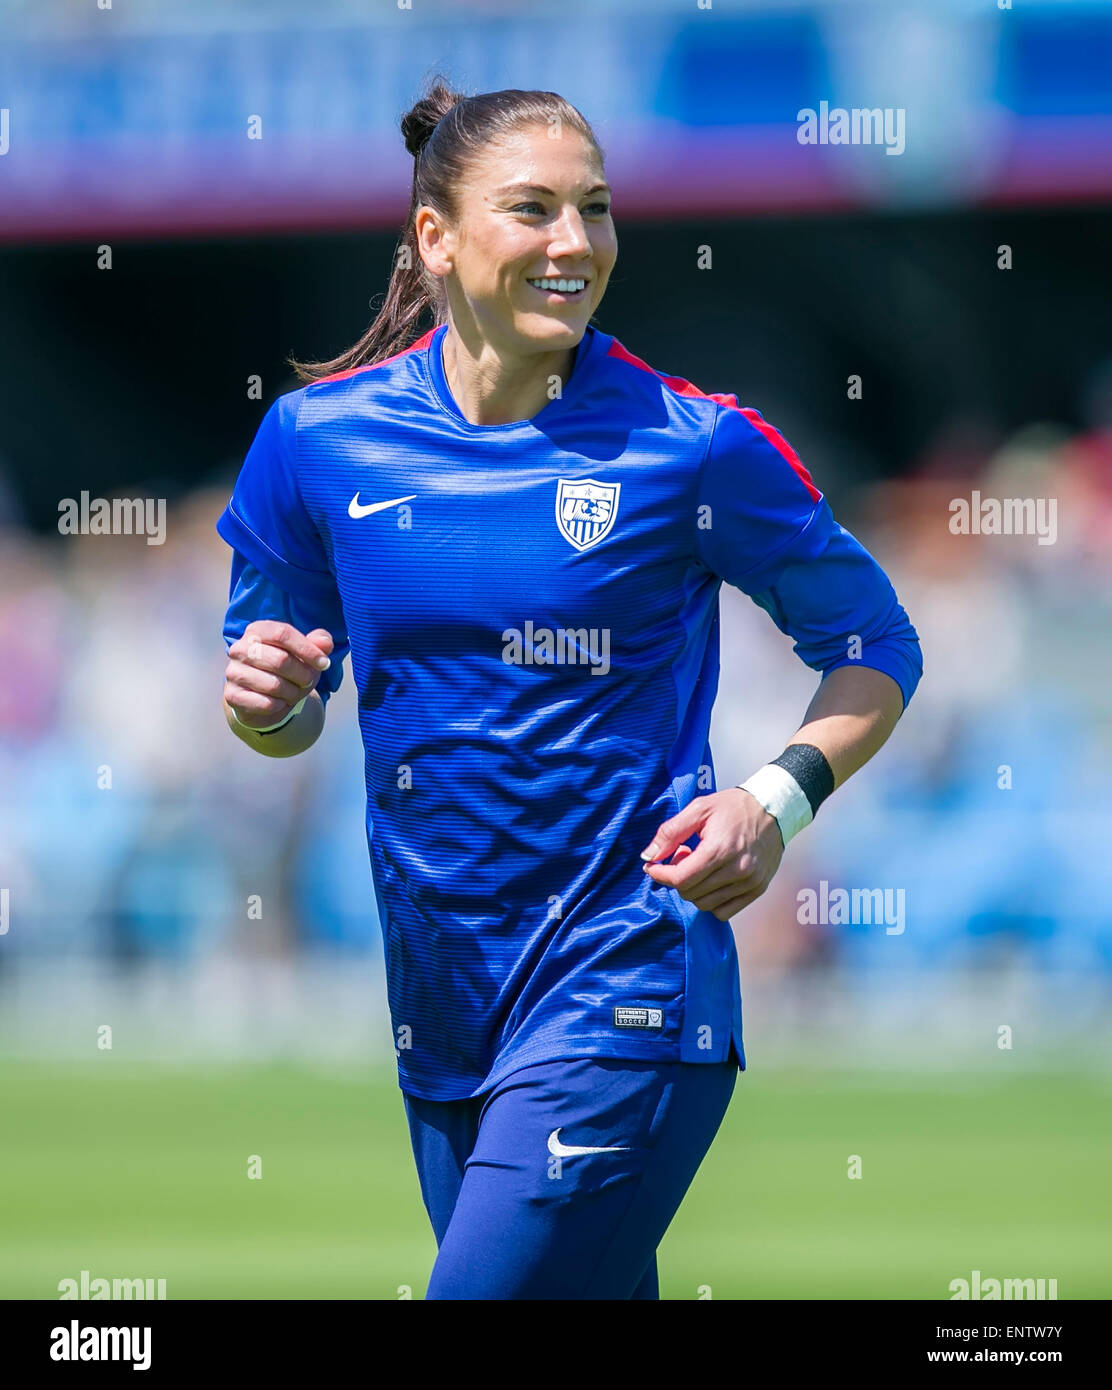 San Jose, CA. 10th May, 2015. US goalie Hope Solo warms up prior to the FIFA soccer game between the US Women's National Team and Ireland at Avaya Stadium in San Jose, CA. The US defeated Ireland 3-0. Damon Tarver/Cal Sport Media/Alamy Live News Stock Photo